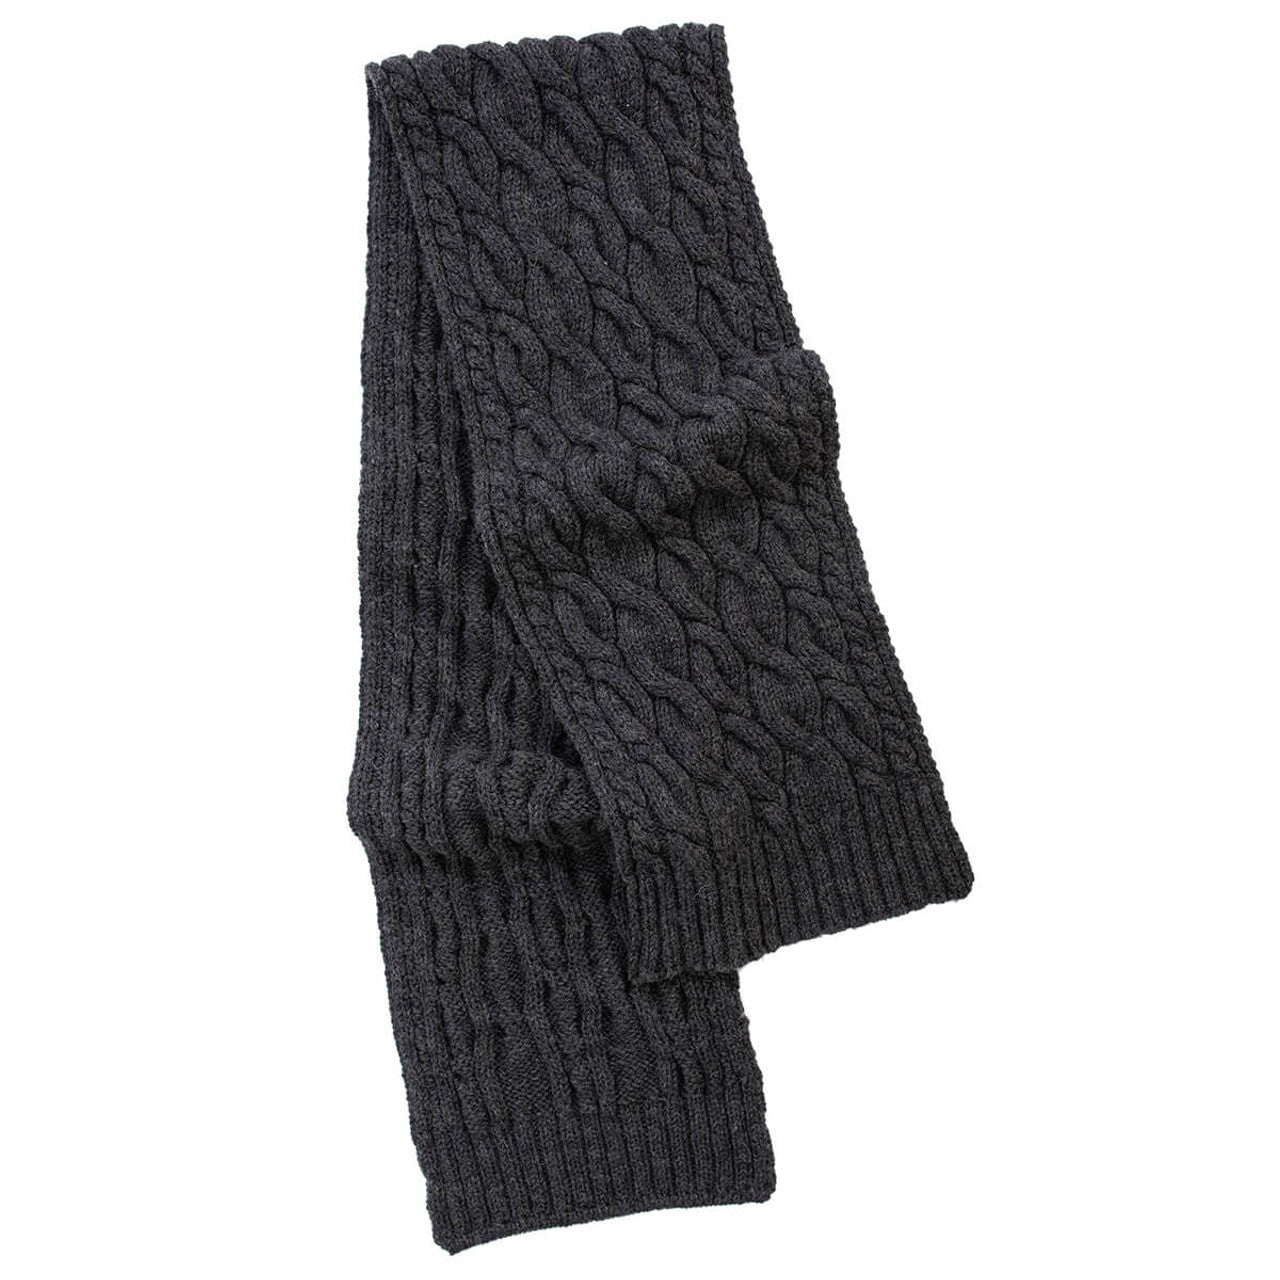 Irish Cable Knit Scarf - Charcoal